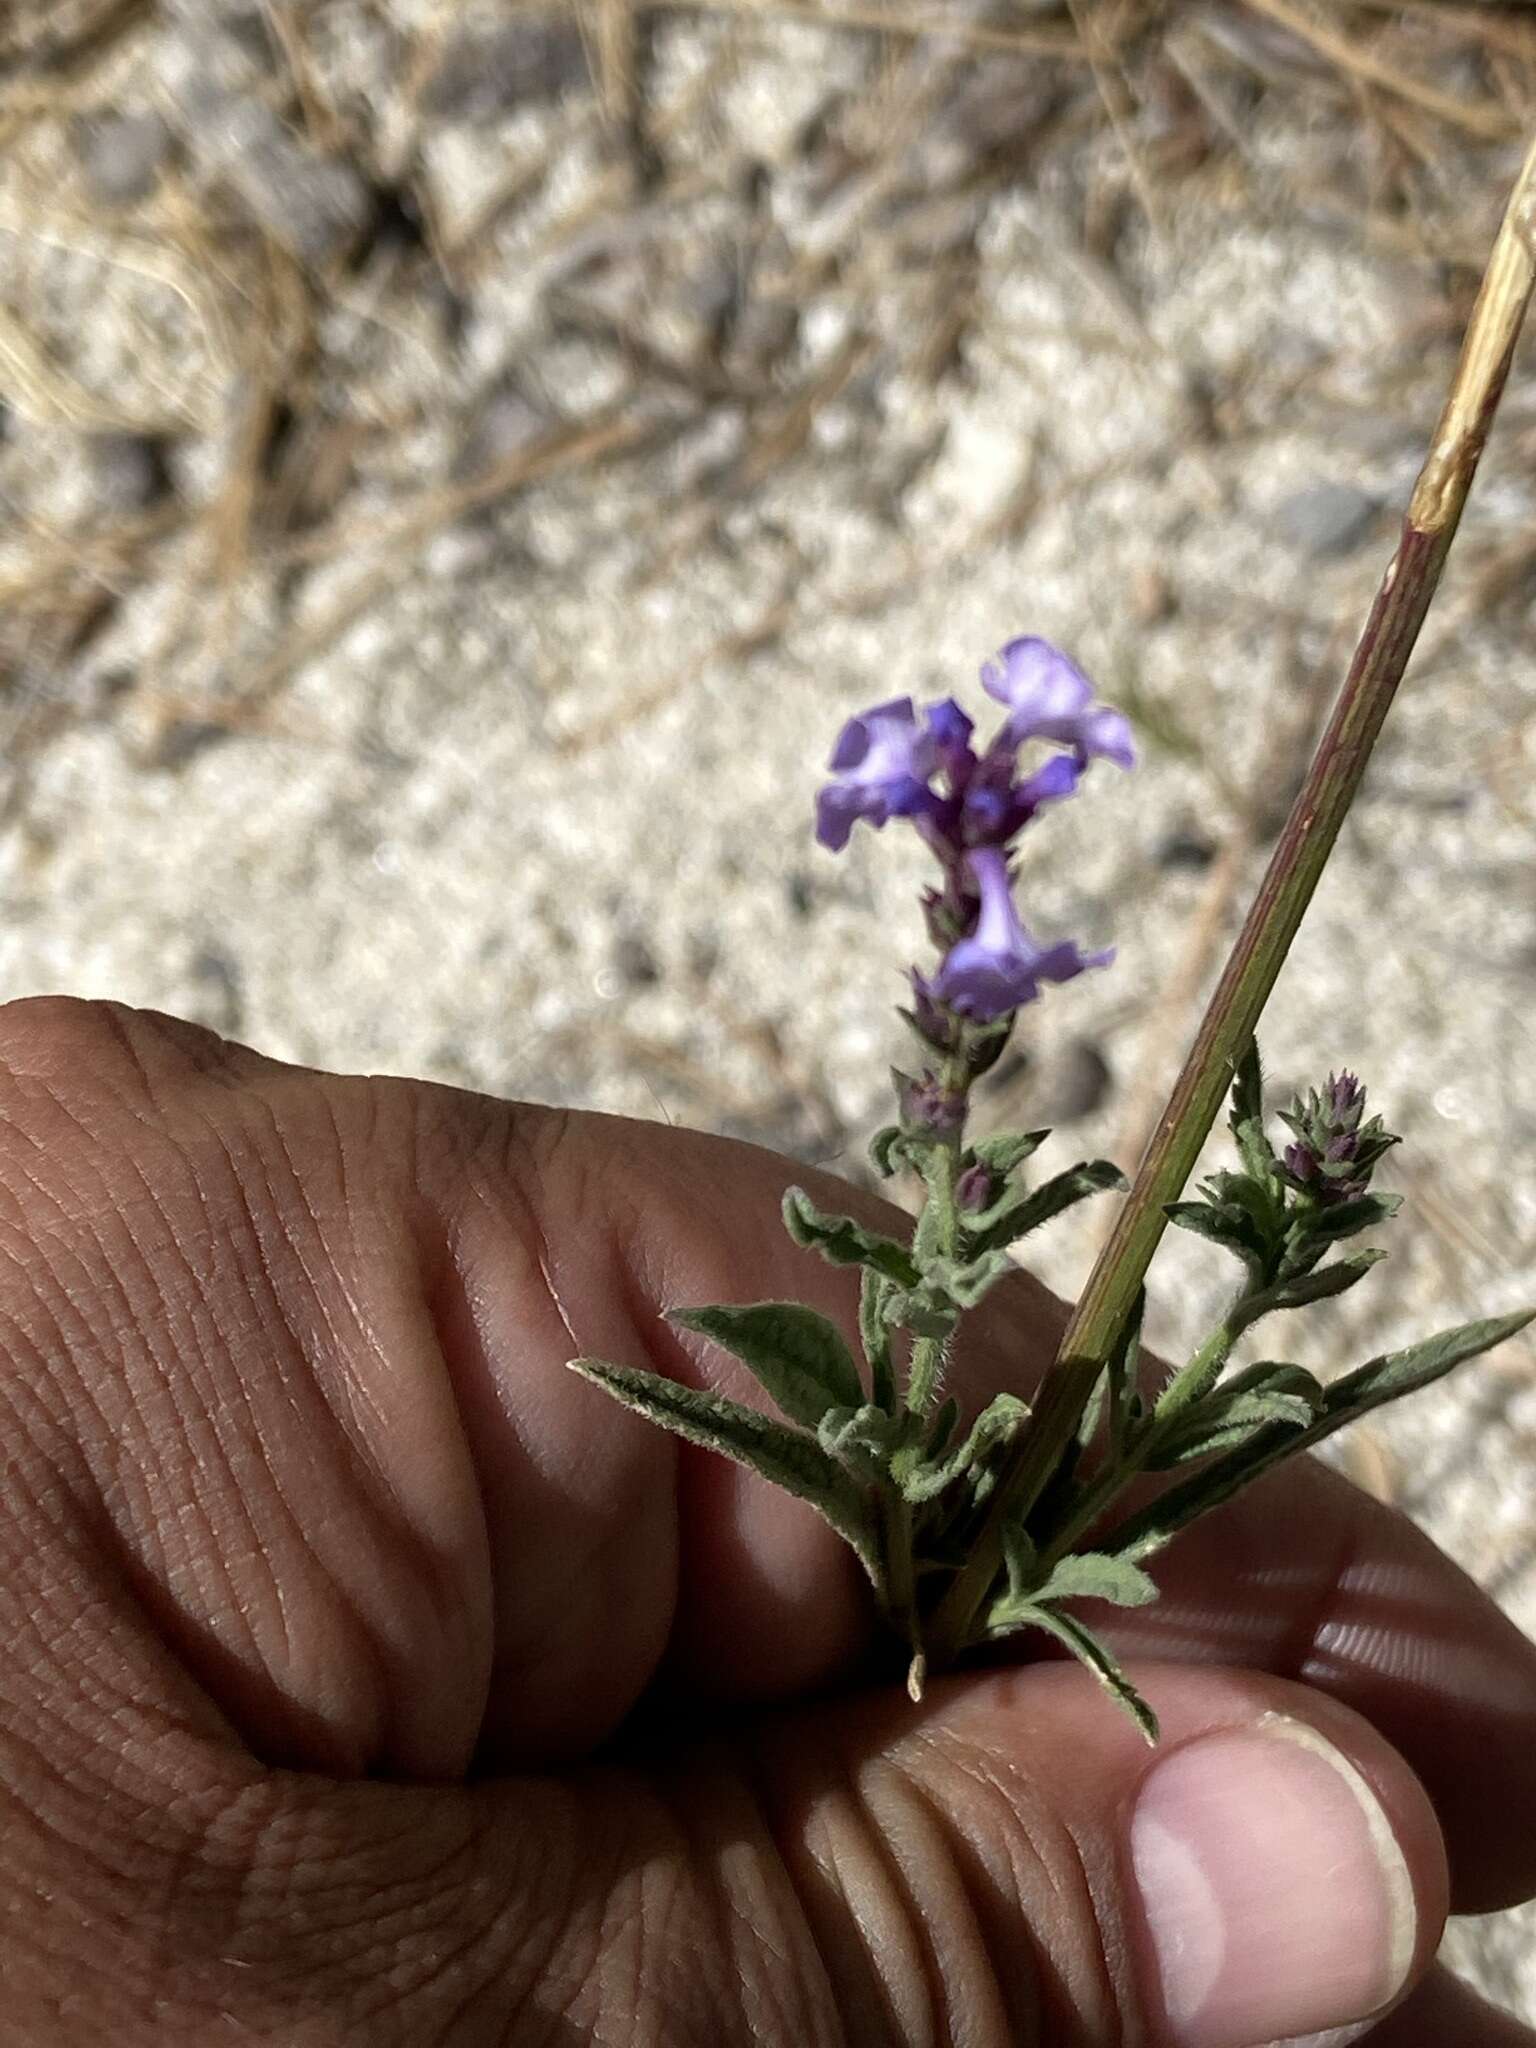 Image of Verbena simplex var. orcuttiana (L. M. Perry) N. O'Leary